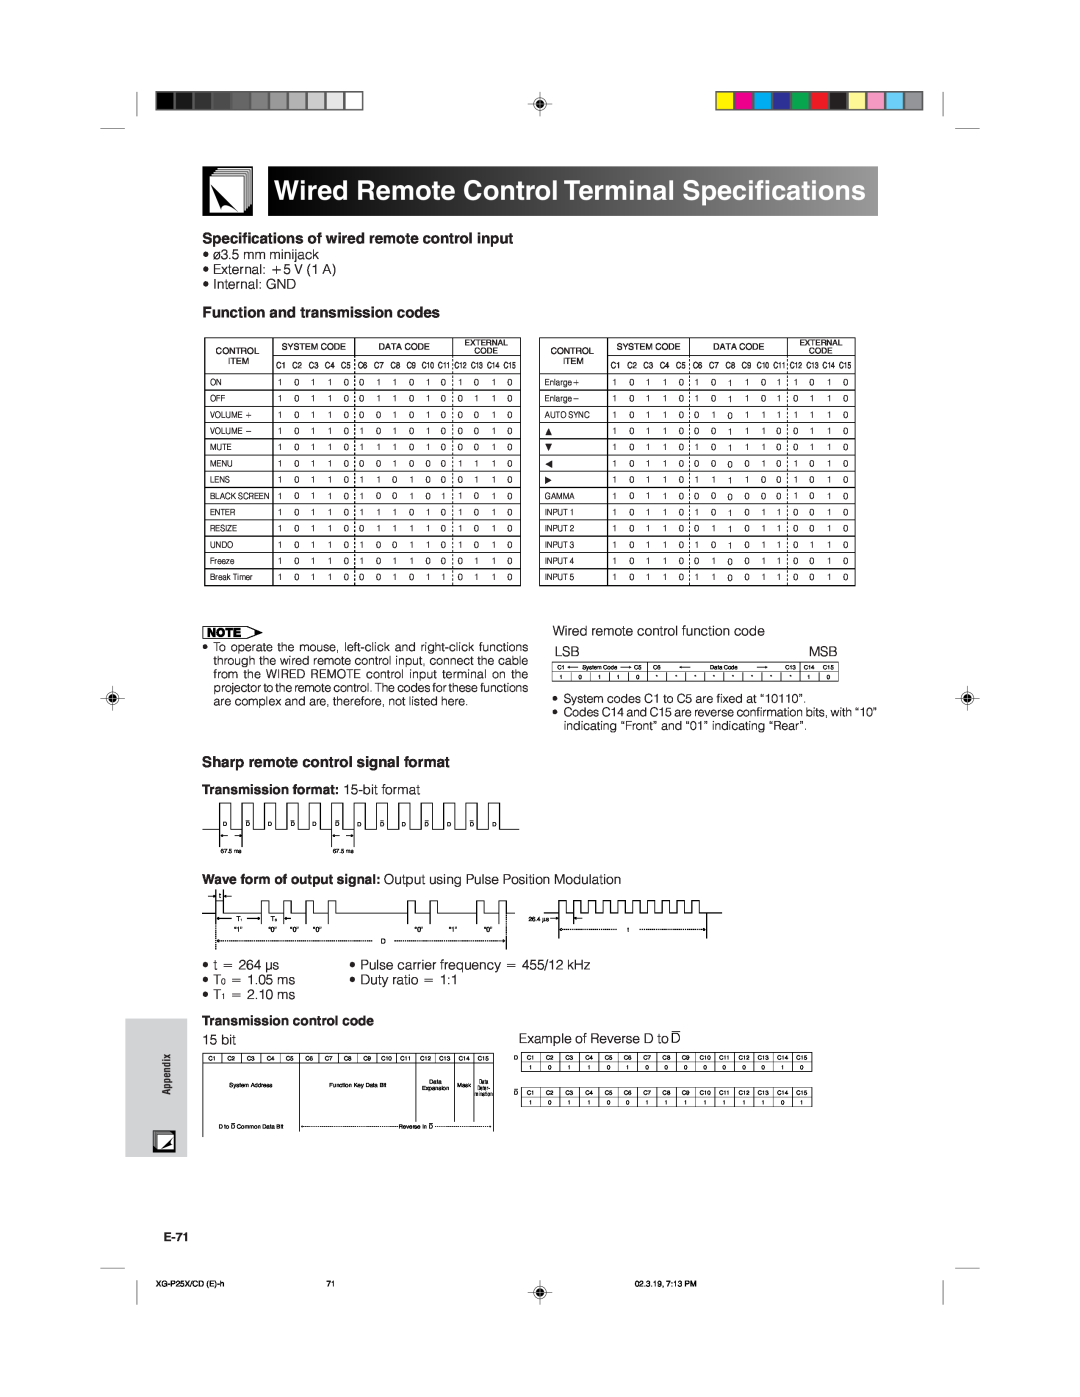 Sharp XG-P25X operation manual Wired Remote Control Terminal Specifications, Specifications of wired remote control input 